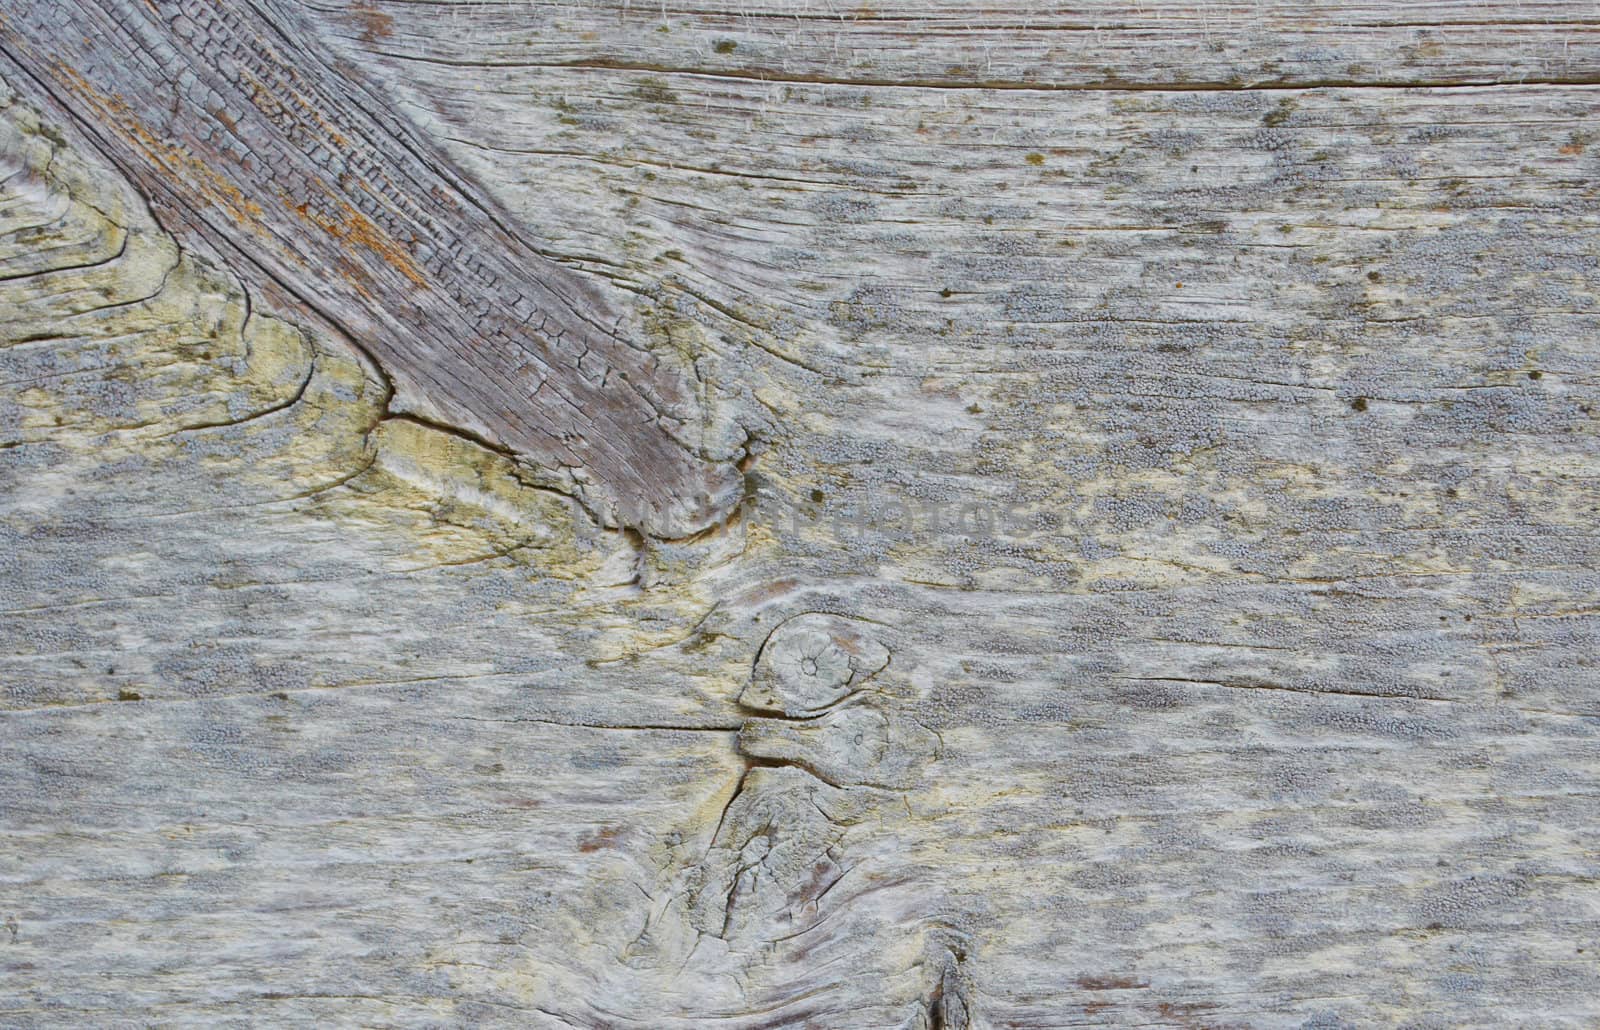  Wooden board with cracks as a natural background